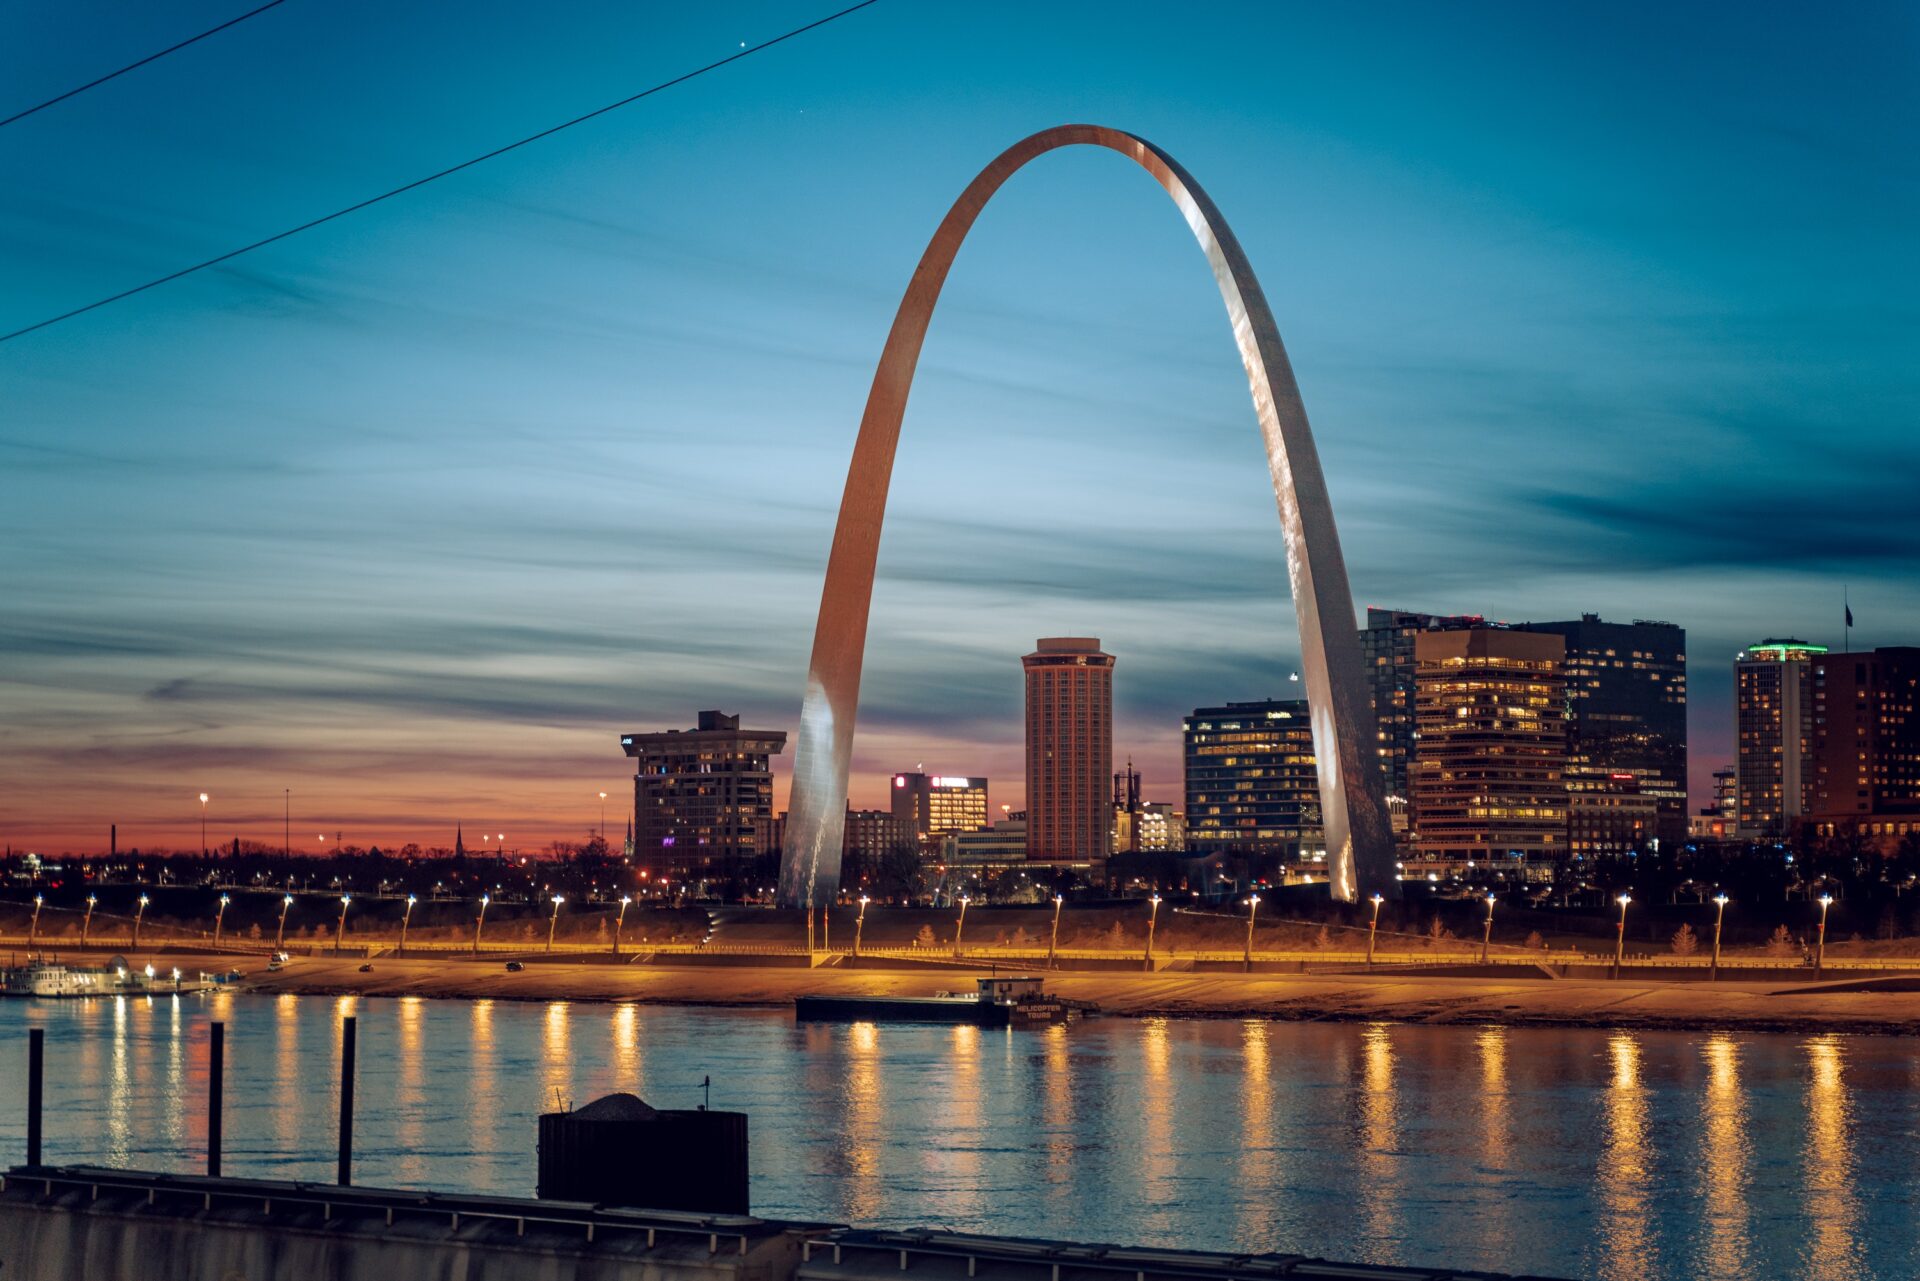 The gateway arch in st louis at dusk.